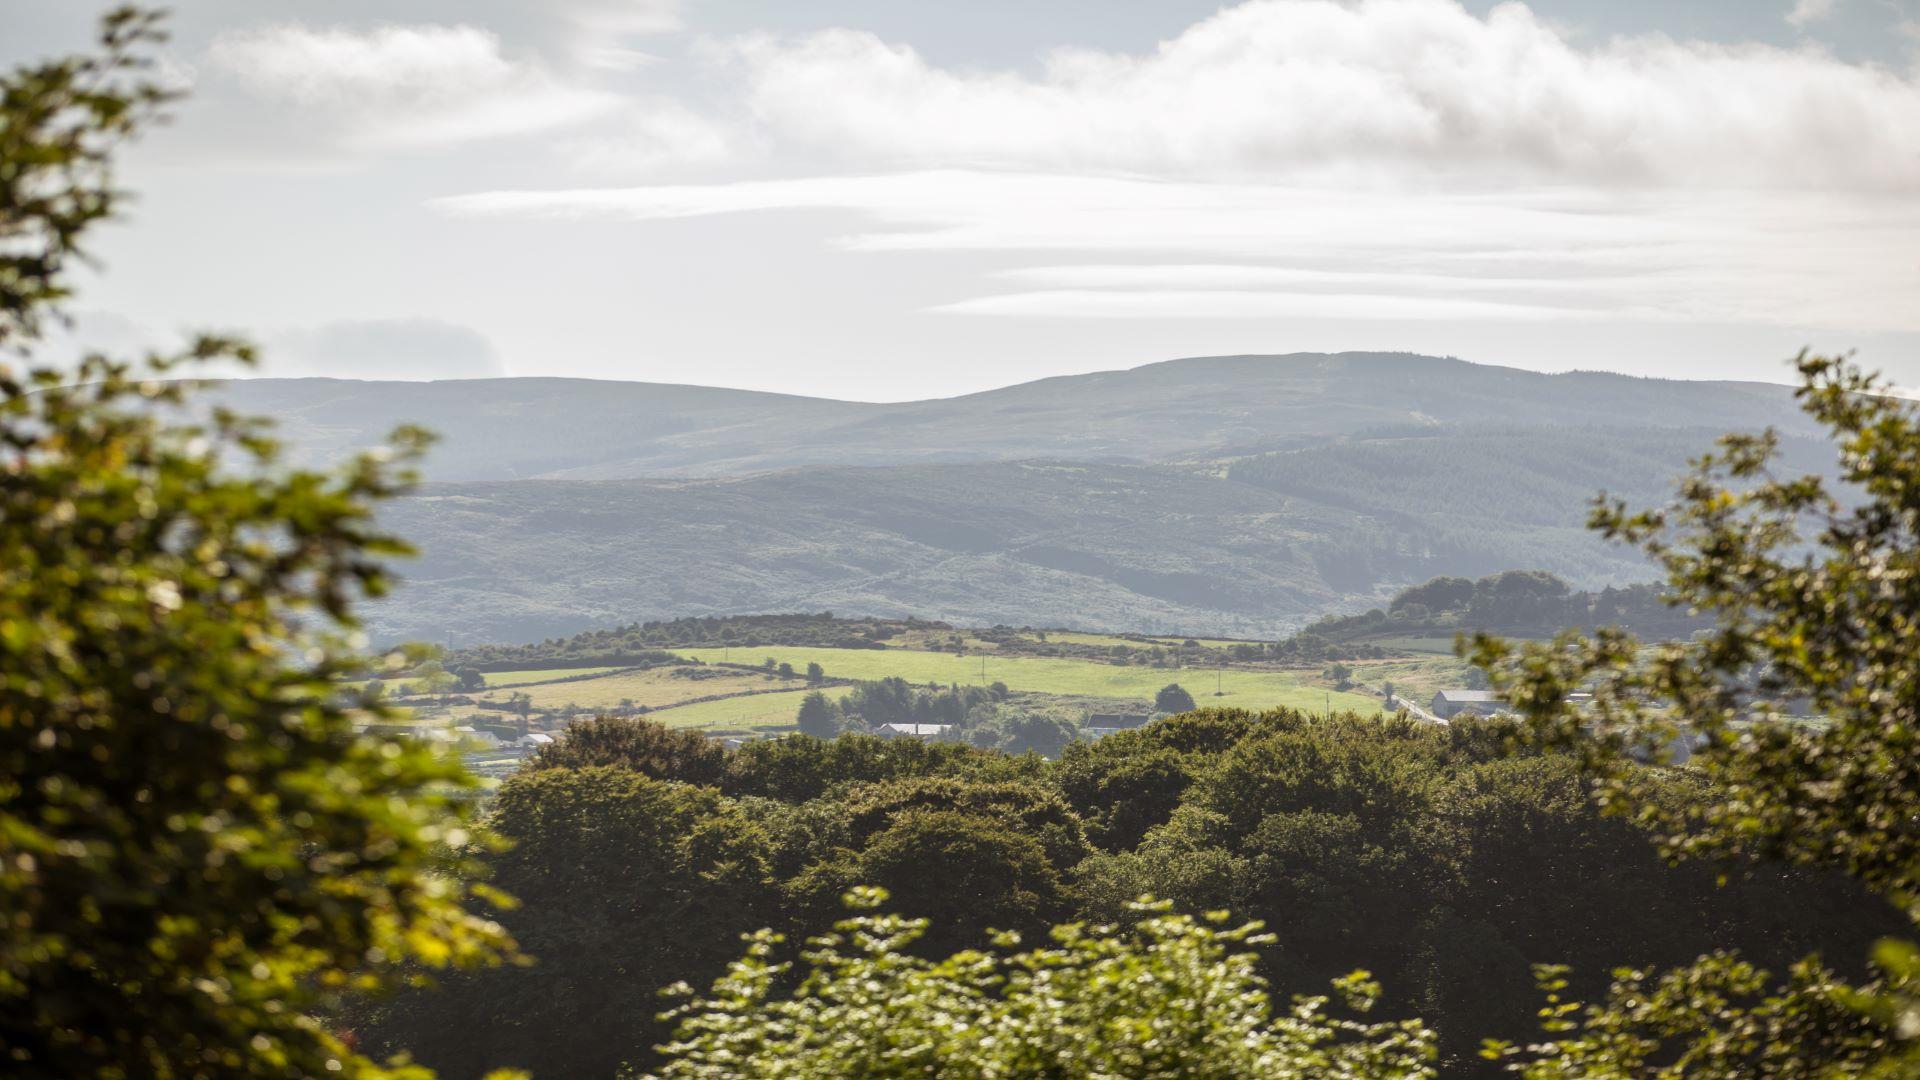 Mountain Views from Slieve Gullion Forest Park